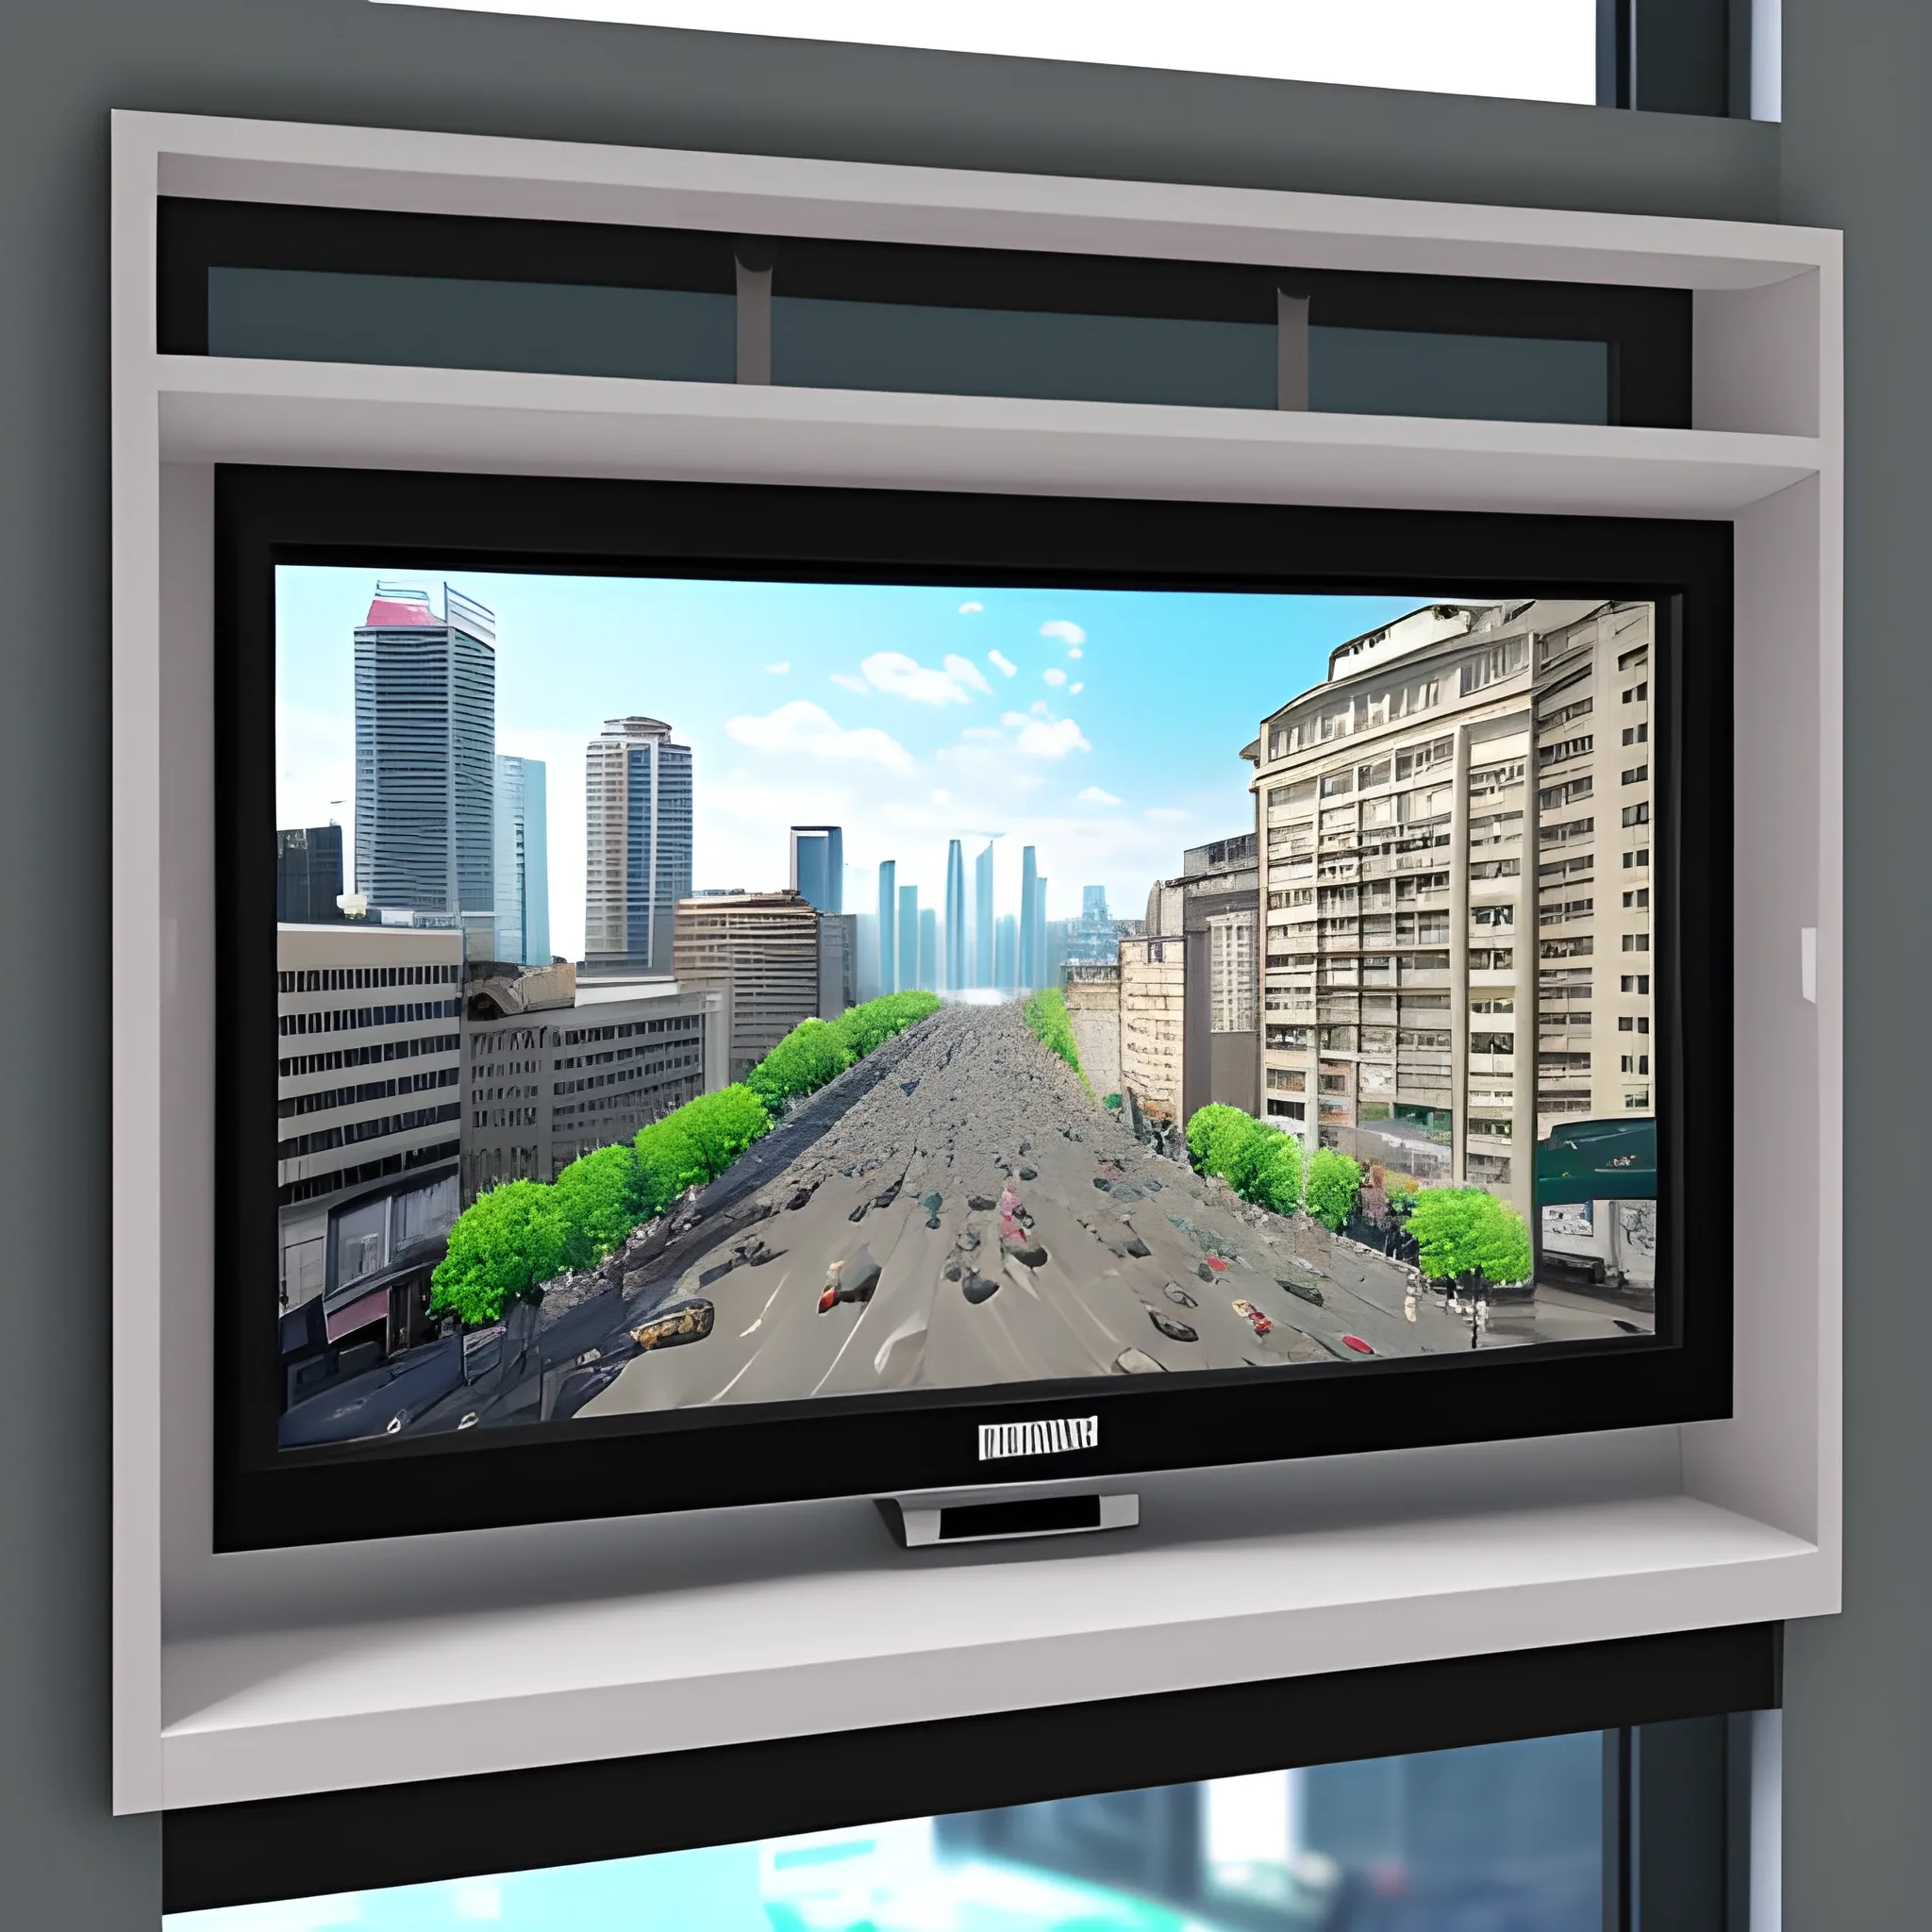 It is placed on a base. The image of a busy city street with pedestrians and vehicles can be seen on the TV screen. From the window of the room, the view of the busy city street can be seen. with the difference that in the window, the street is real, and in the TV it is a fake and assembled image.

In this way, there is corruption in the TV picture but it is visible in the reality window, 3D